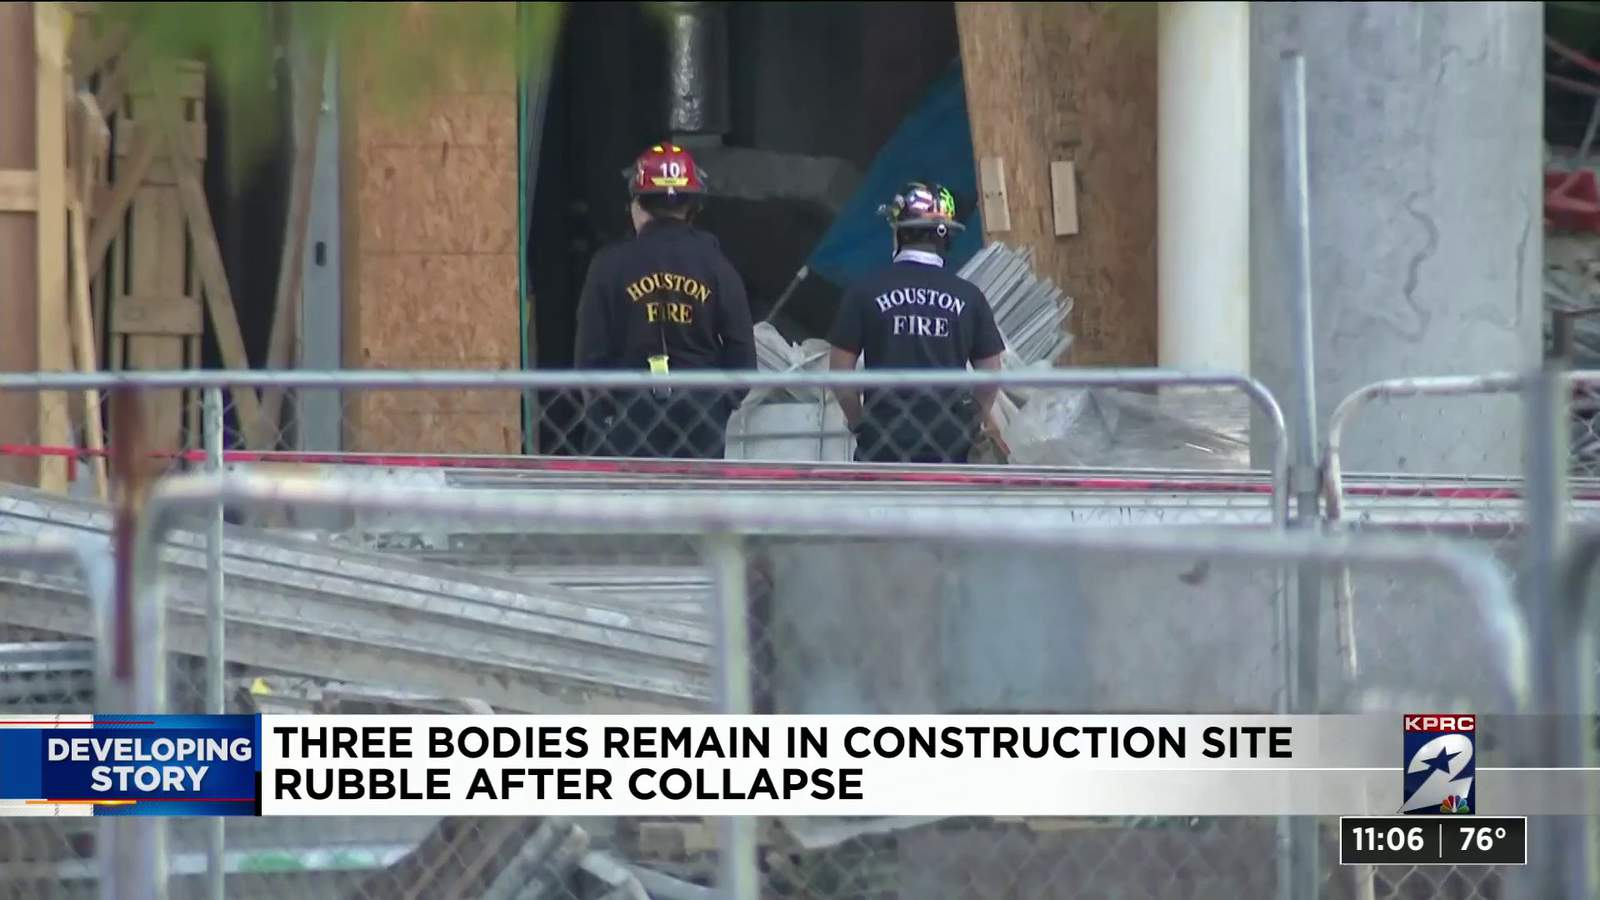 Crews work to find bodies of 3 workers killed in stairwell collapse